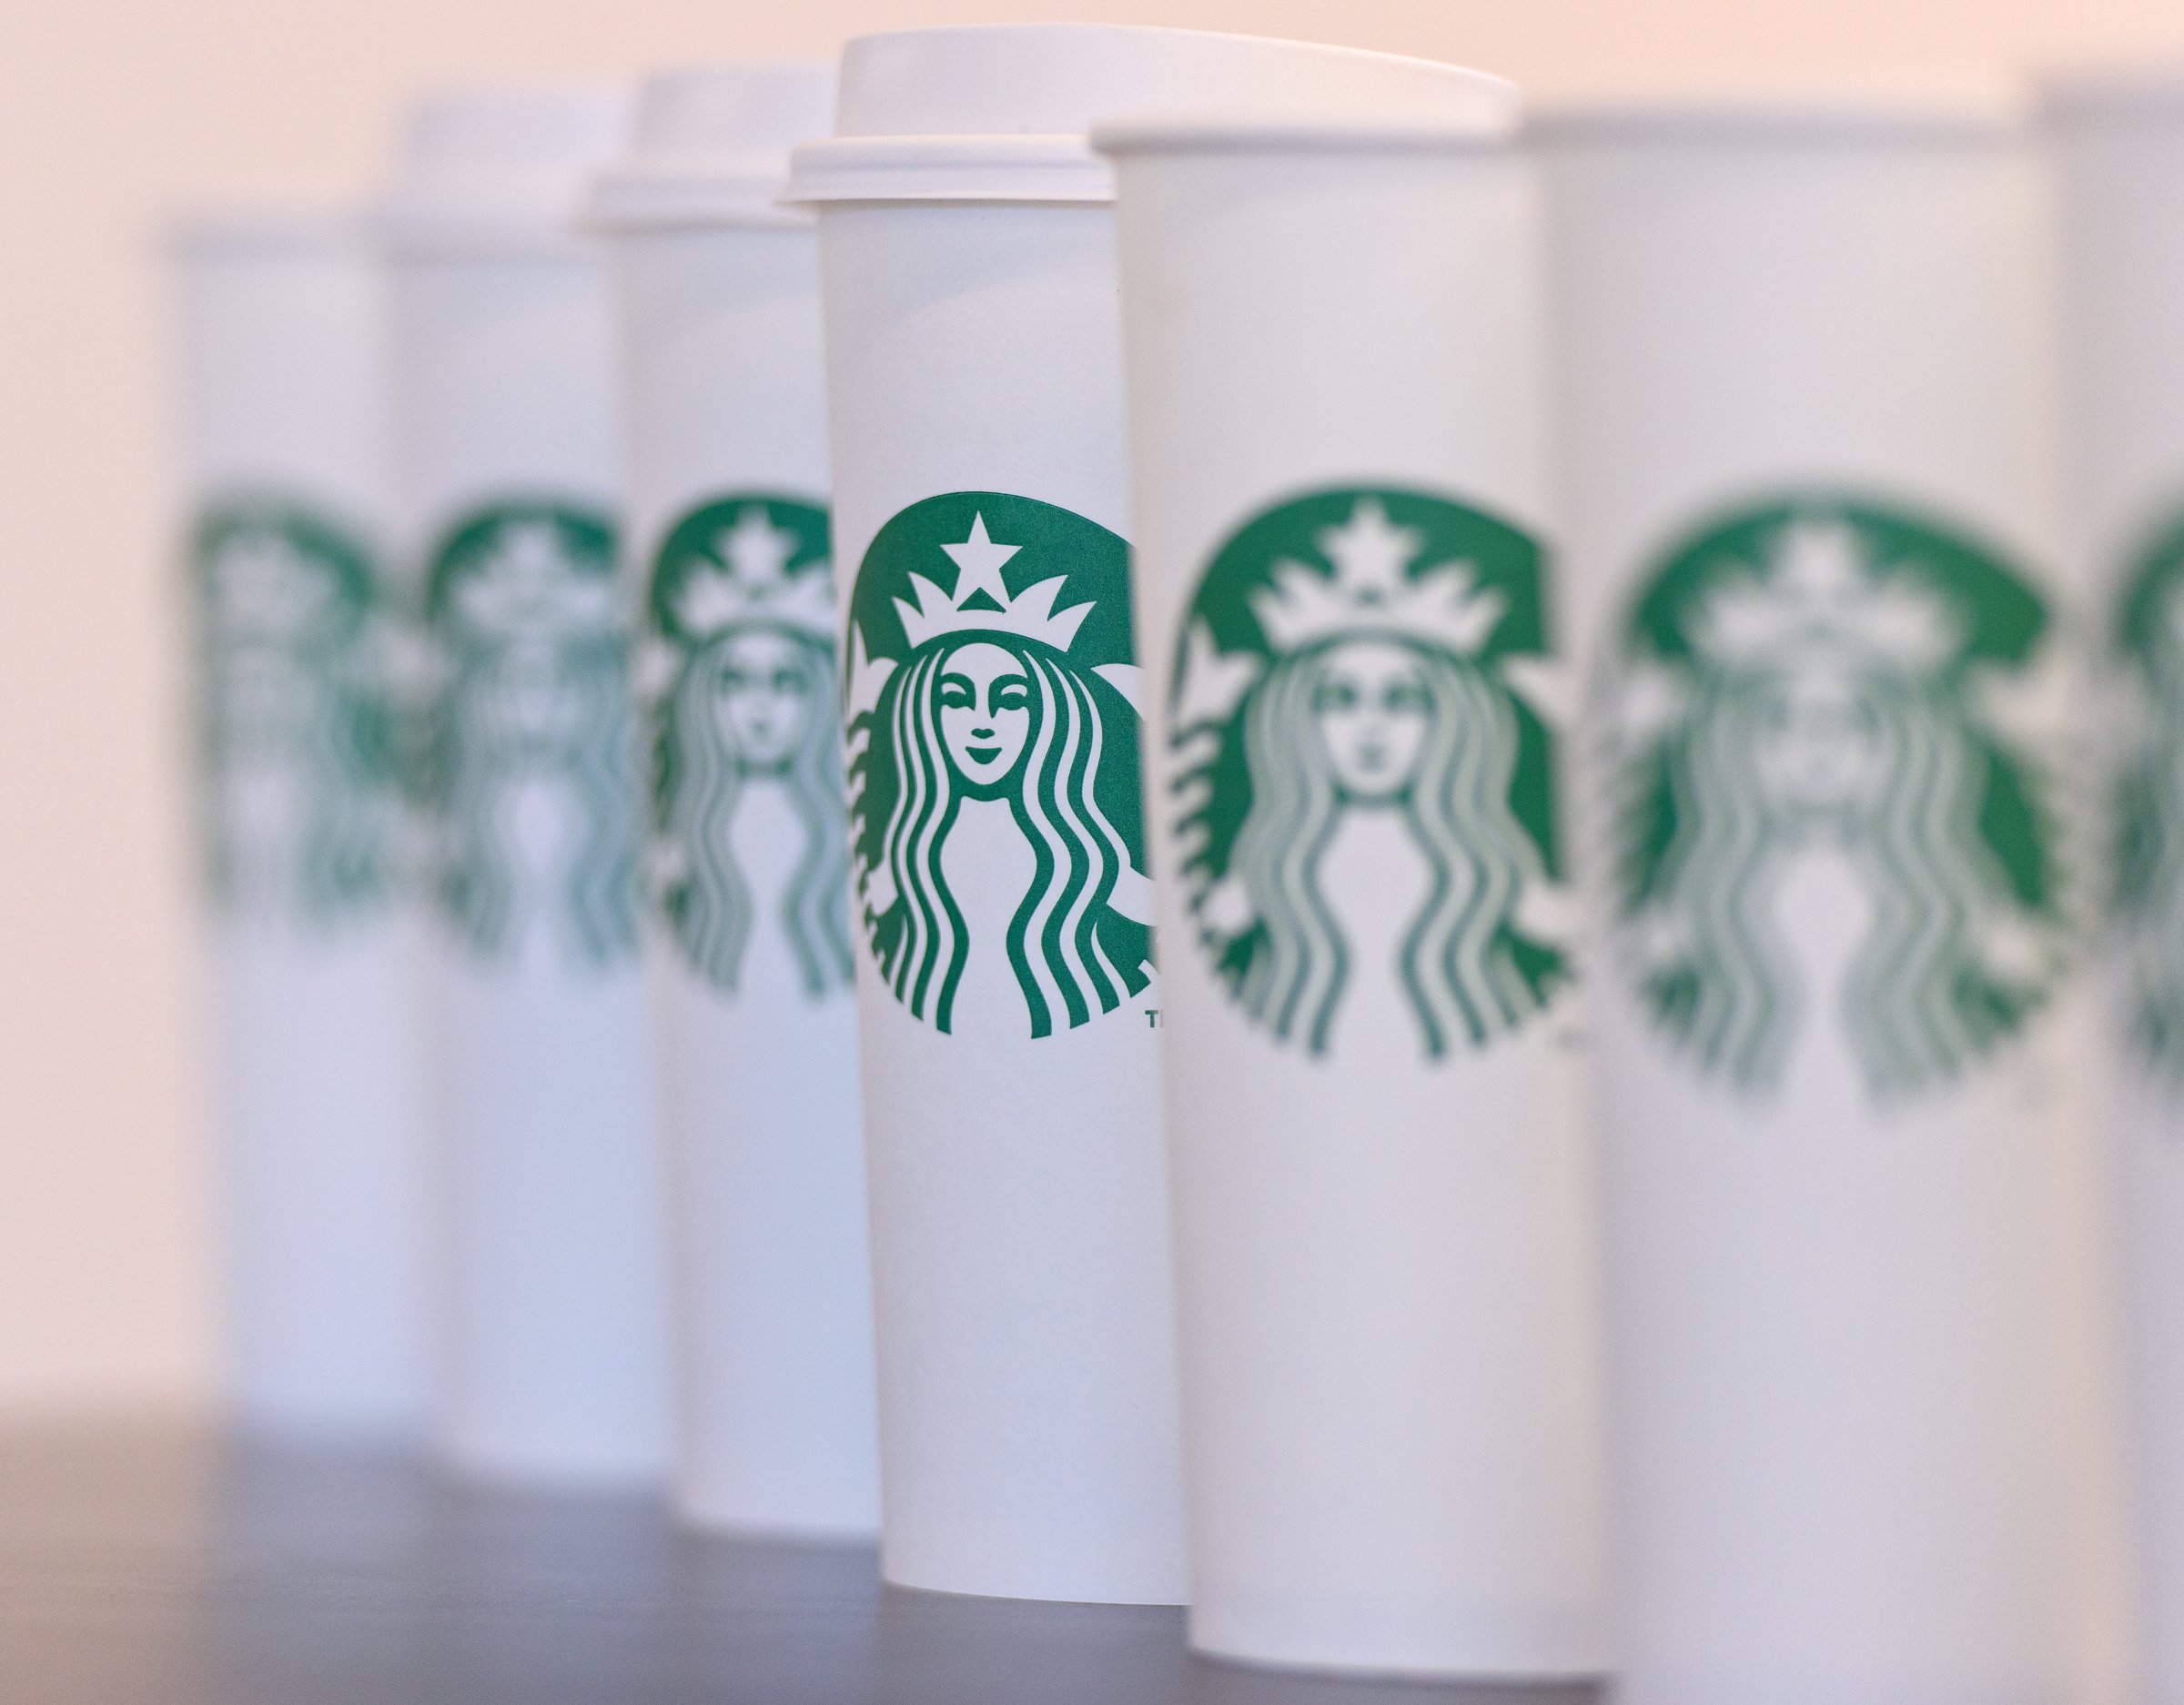 A collection of venti sized Starbucks take away cups on February 18, 2016 in London, England.